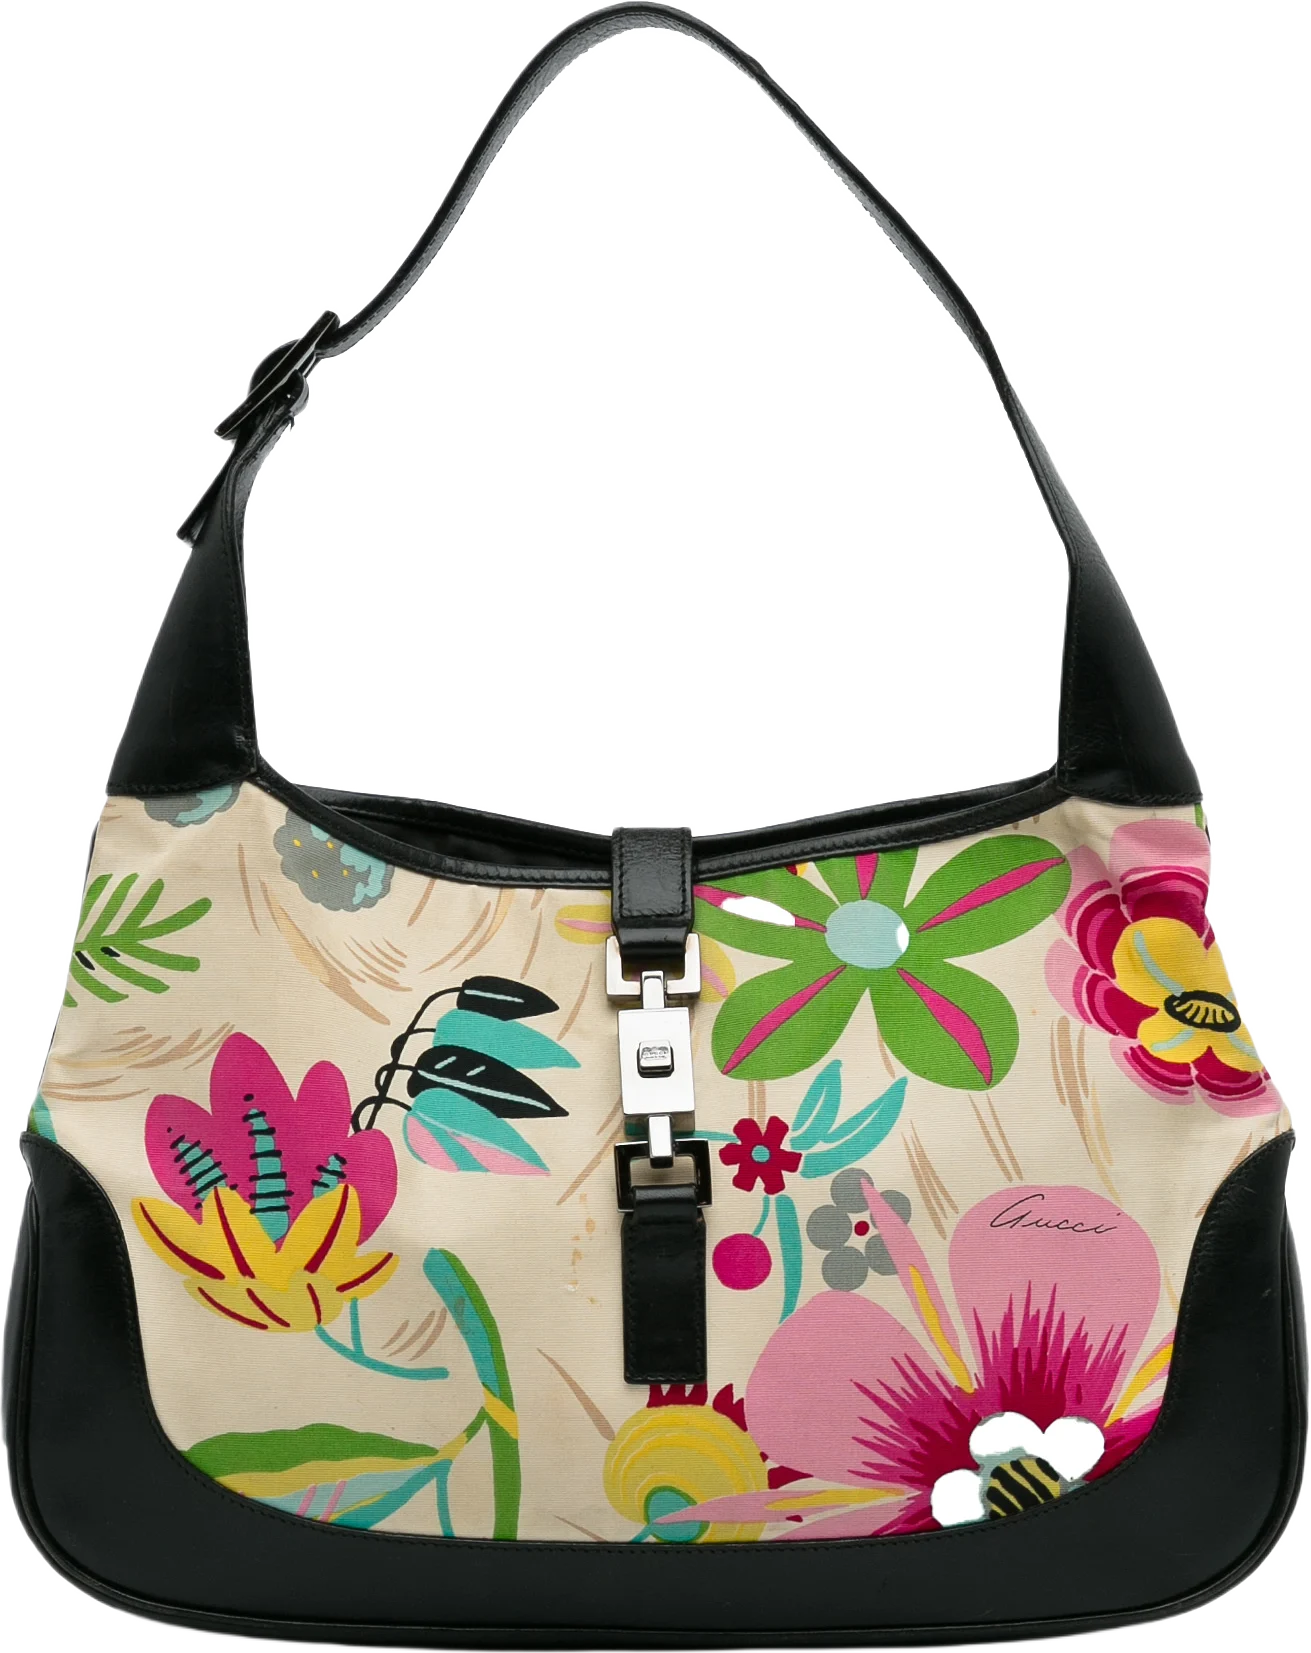 Gucci Small Floral Jackie O Hobo